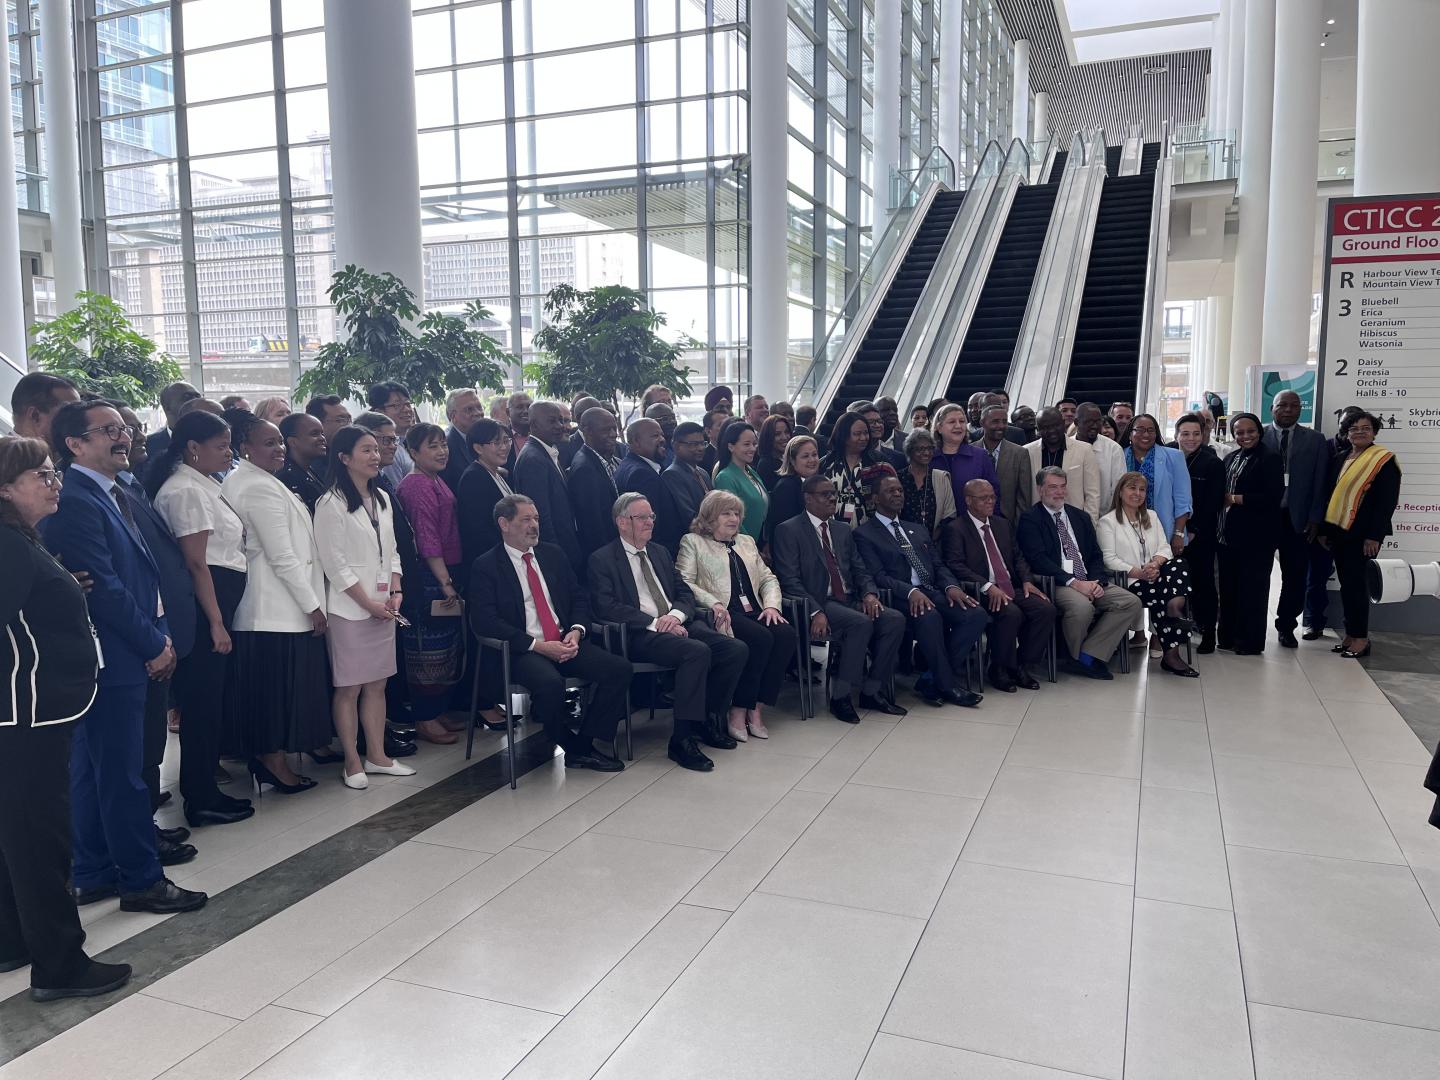 Around 100 participants from the countries and areas that are part of WHO’s Elimination-2025 initiative, WHO staff from the Headquarters, Regional Officers, and Country Offices, members of the WHO’s Technical Advisory Group on Malaria Elimination and Certification, as well as observers attended the forum.